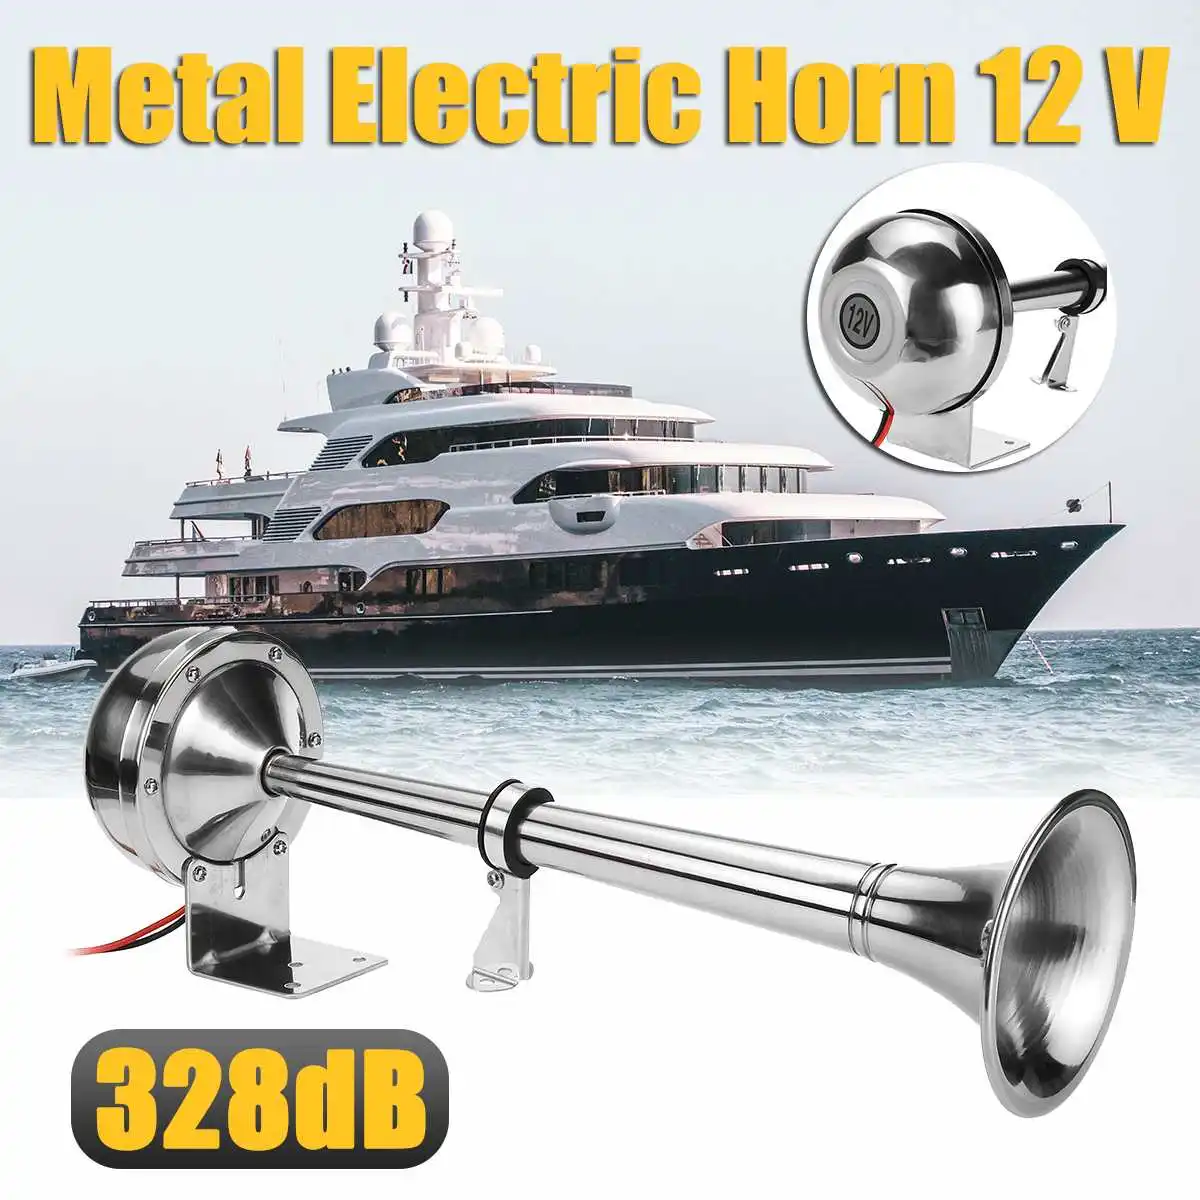 Air Horn, Chrome Zinc Dual Trumpet Air Horn with Compressor for Any 12V  Vehicles Trucks Lorrys Trains Boats Cars Vans - AliExpress